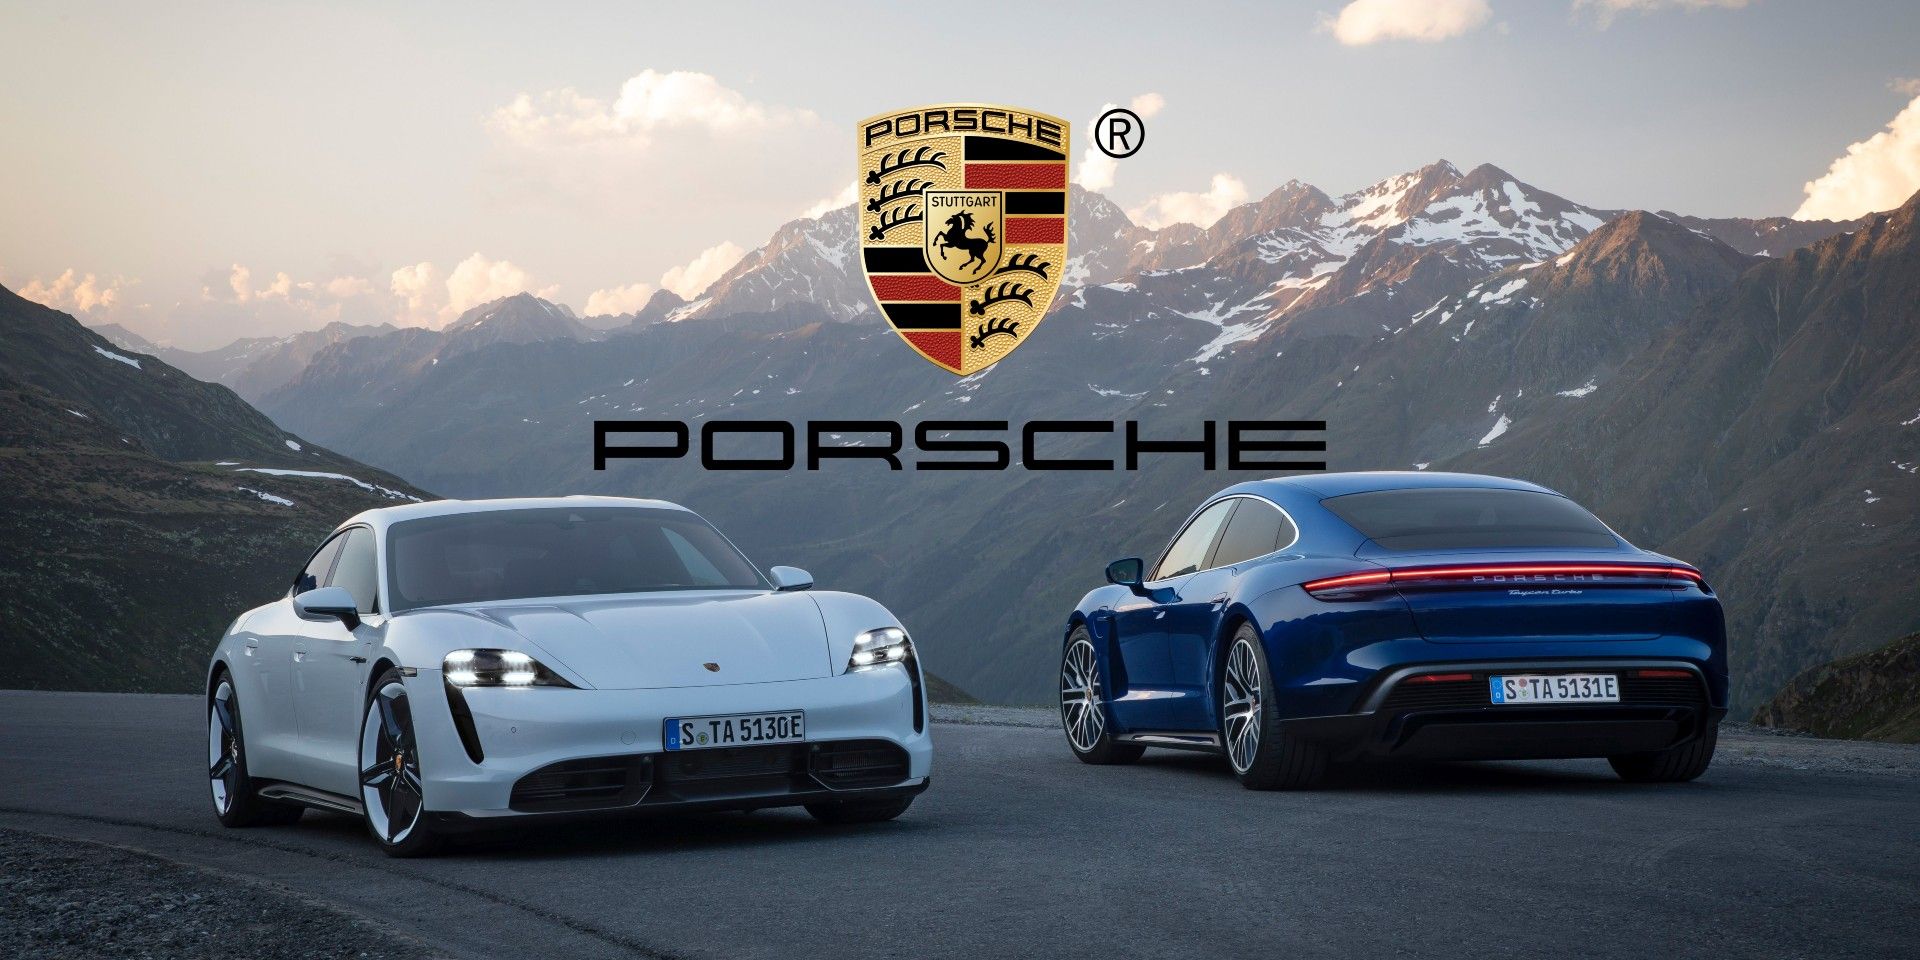 Porsche Taycan Ev Recall Over Battery Issue What You Need To Know